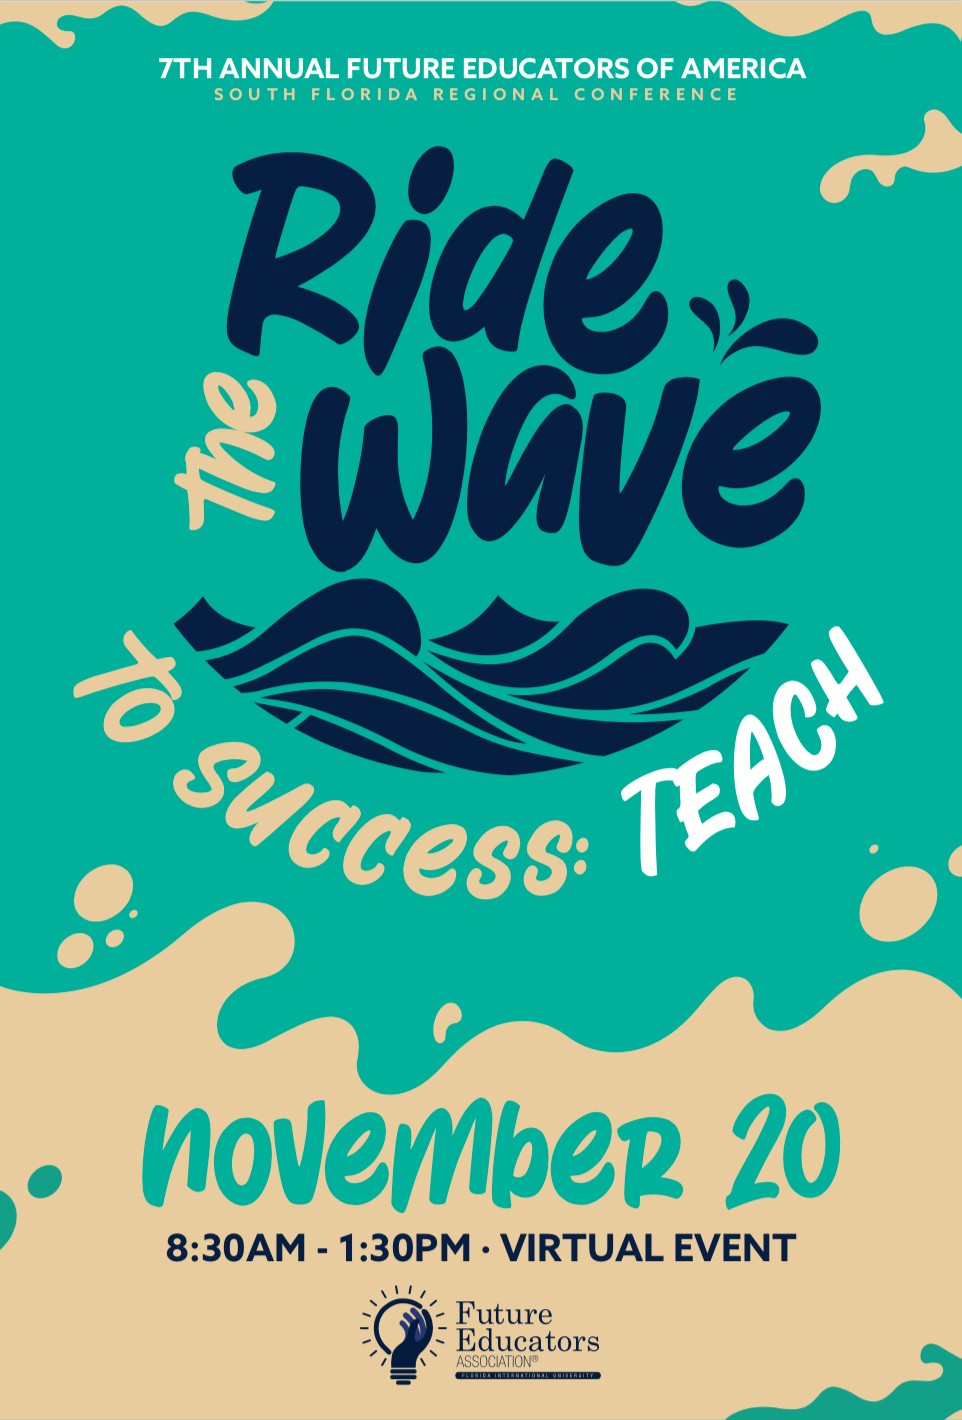 Flyer for the 7th Annual Future Educators of America South Florida Regional Conference. Ride the Wave to Success: TEACH. November 20, 8:30am-1:30pm. Virtual Event.